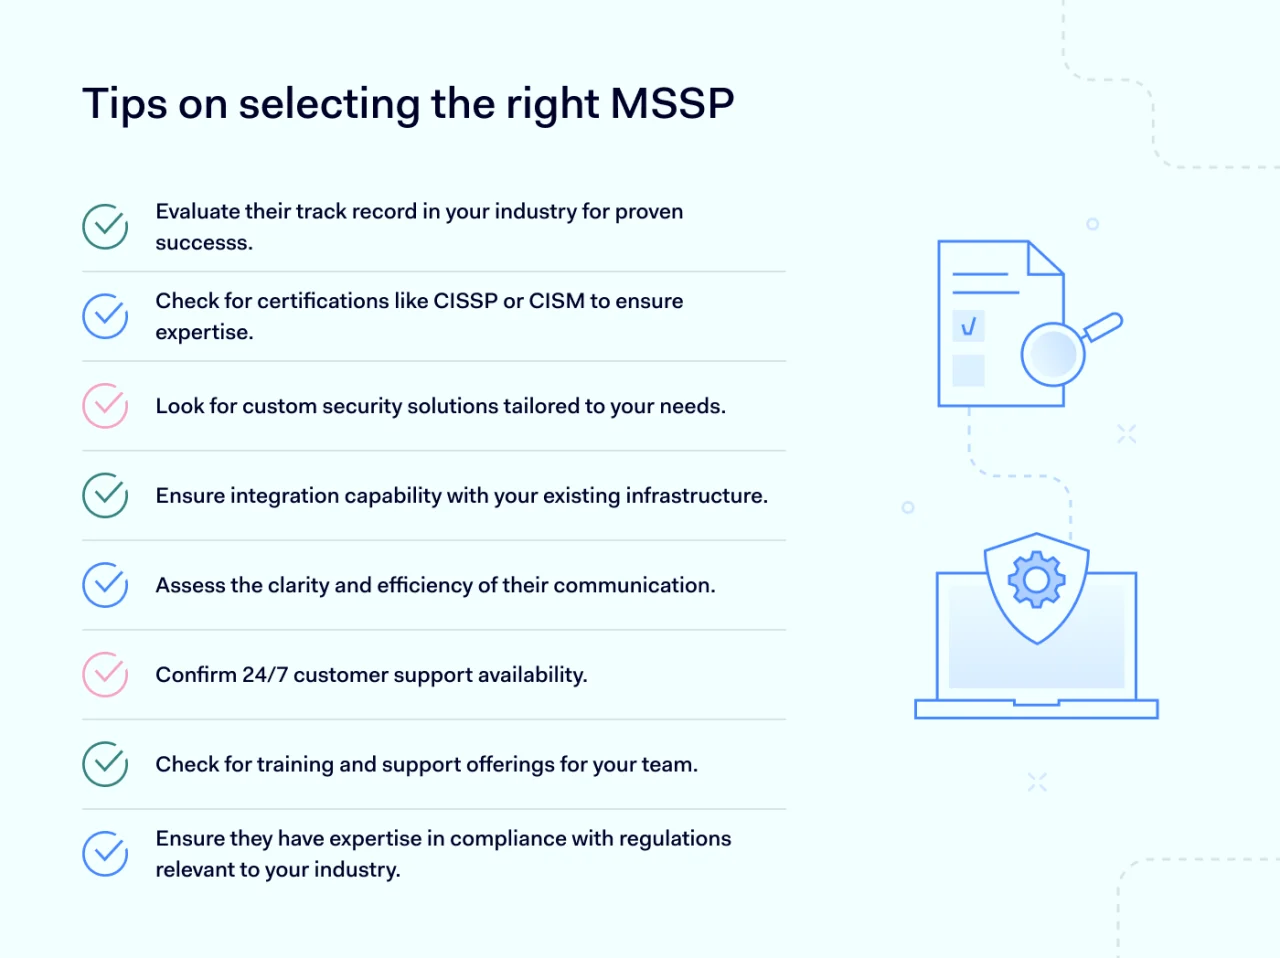 Tips on selecting the right Managed Security Service Provider